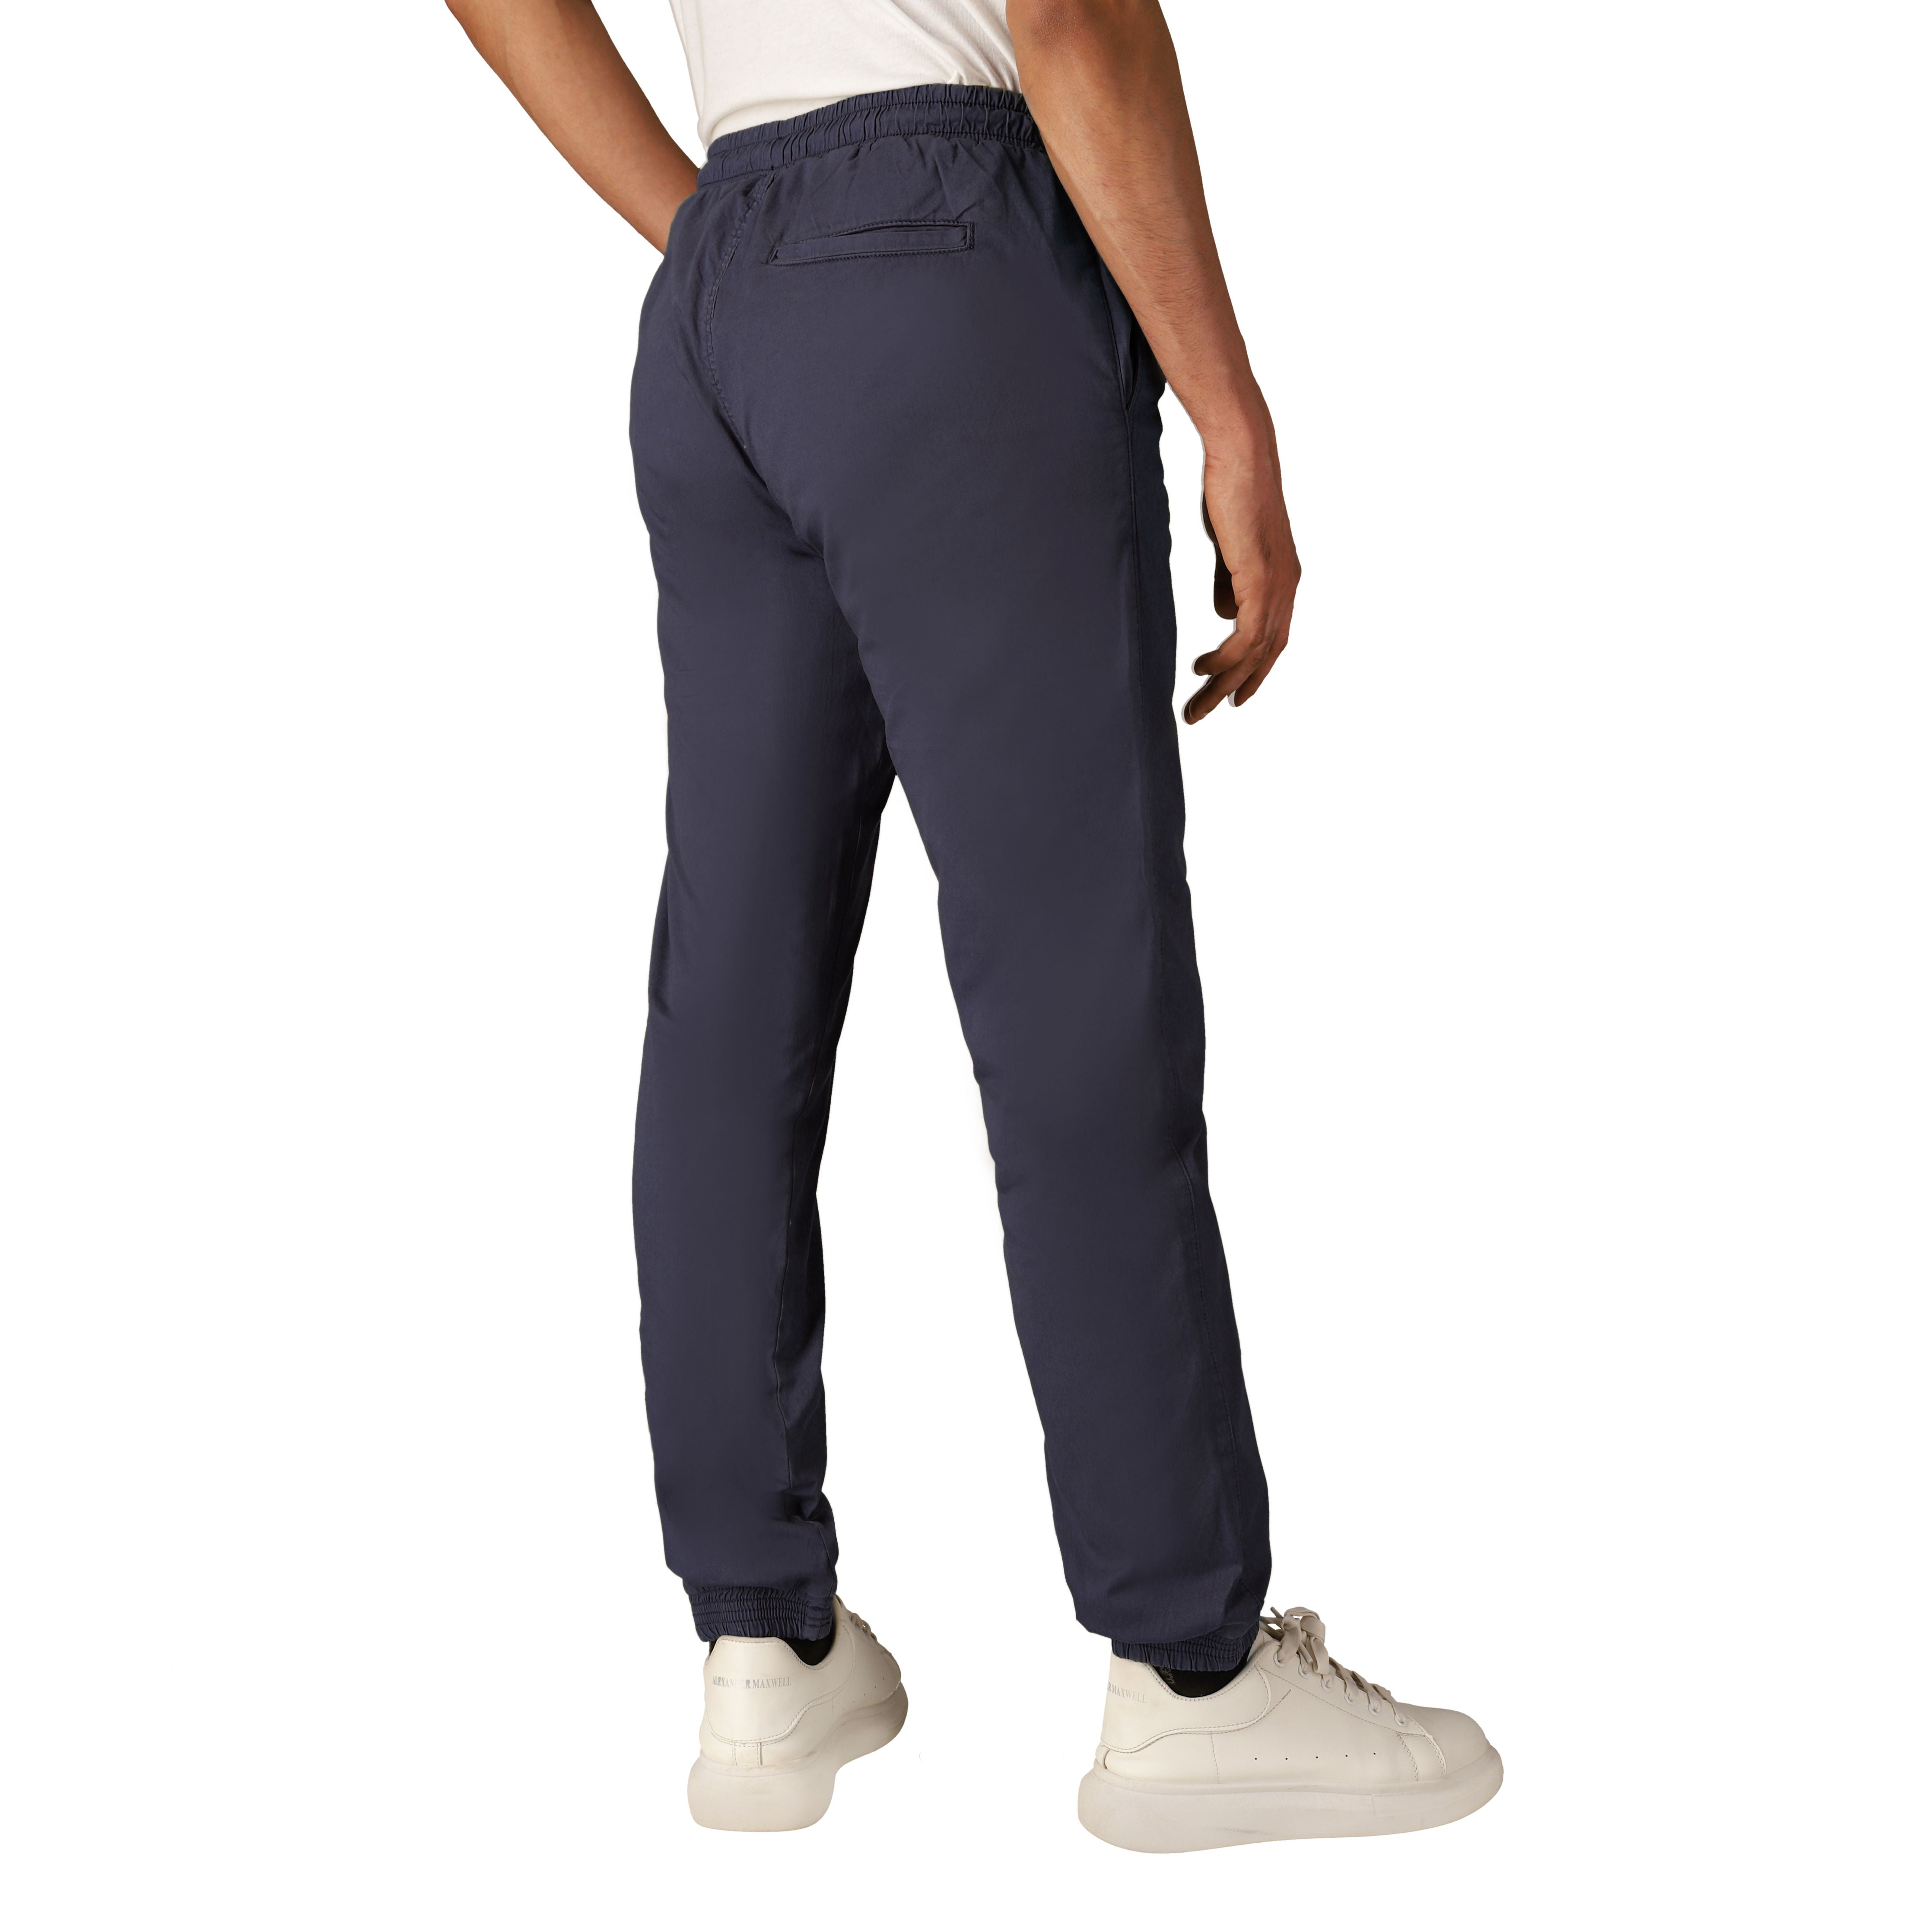 YOURS Plus Size Navy Blue Cuffed Stretch Joggers